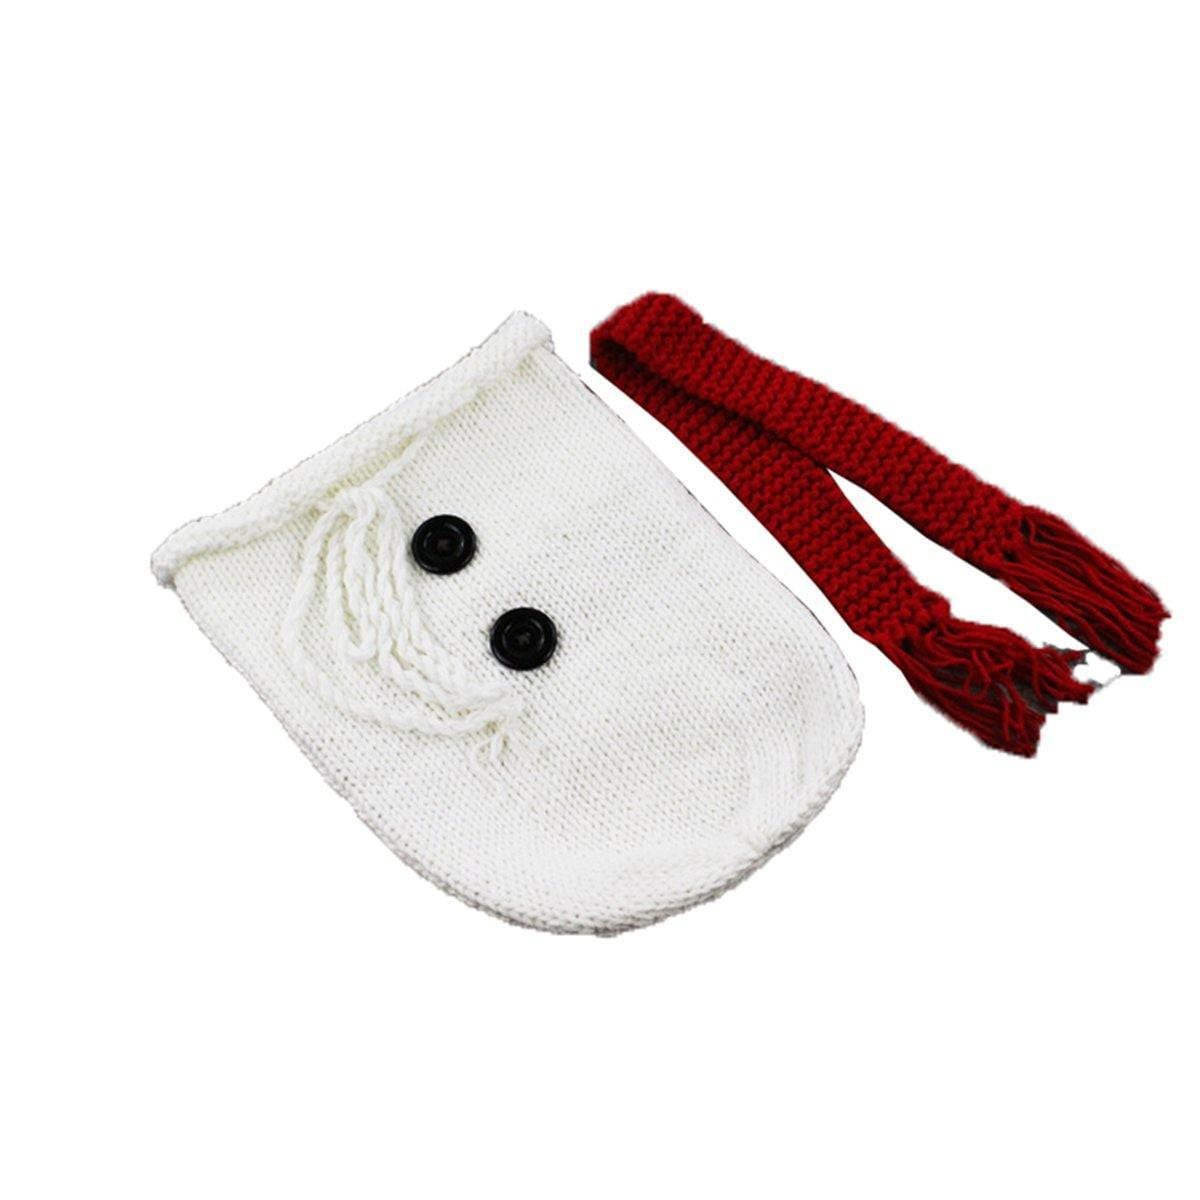 ezy2find baby clothing White Newborn Baby Crochet Knit Costume Photography Photo Prop Snowman Hat Cap Set Christmas Gift